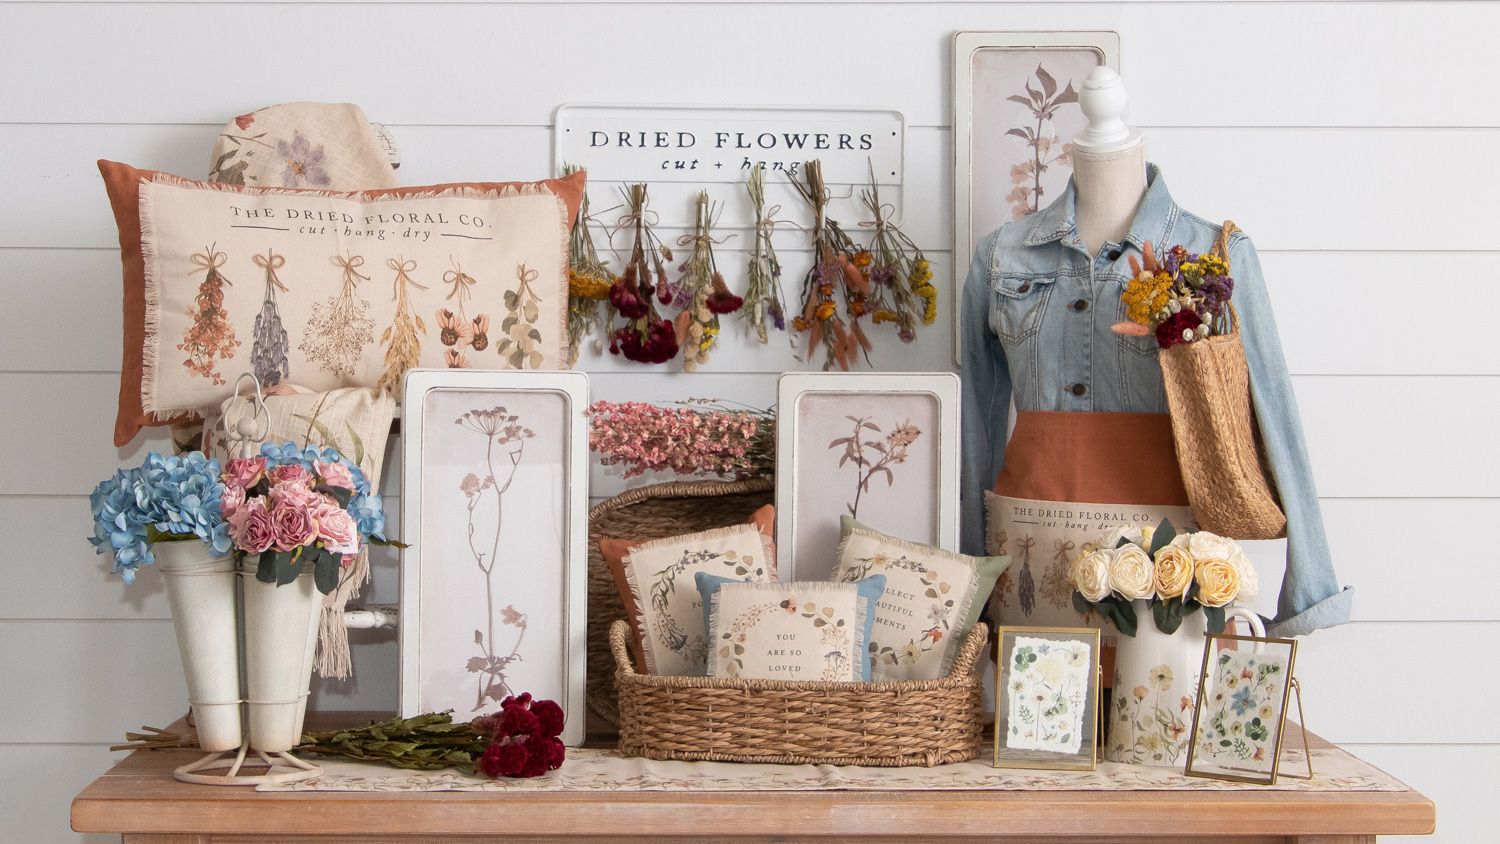 The Dried Floral Co. display room scene